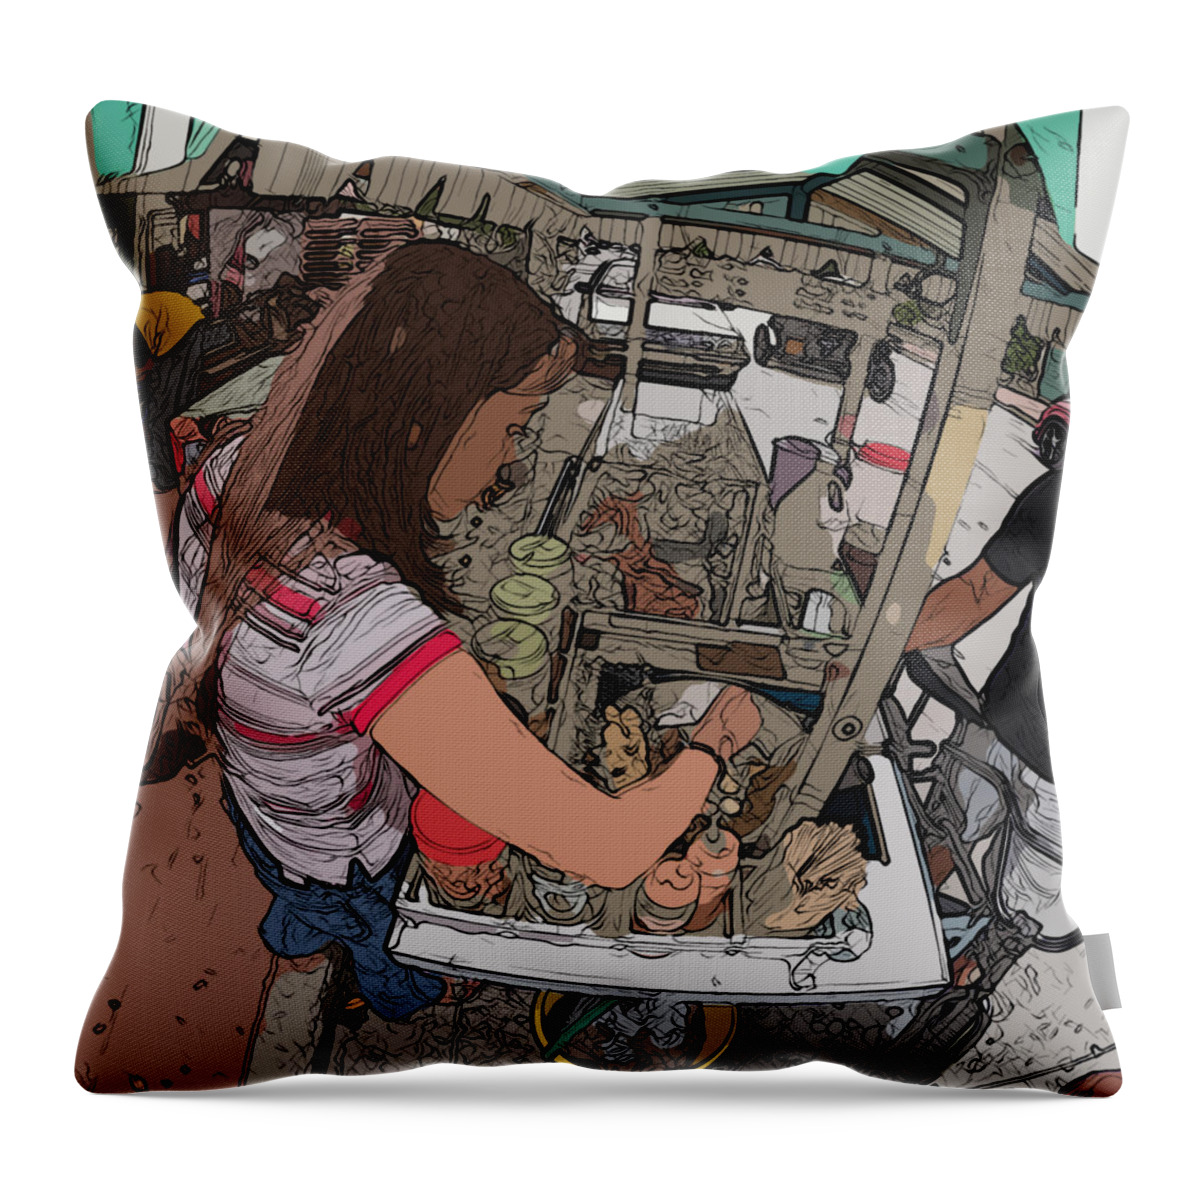 Philippines Throw Pillow featuring the painting Philippines 91 Street Food by Rolf Bertram